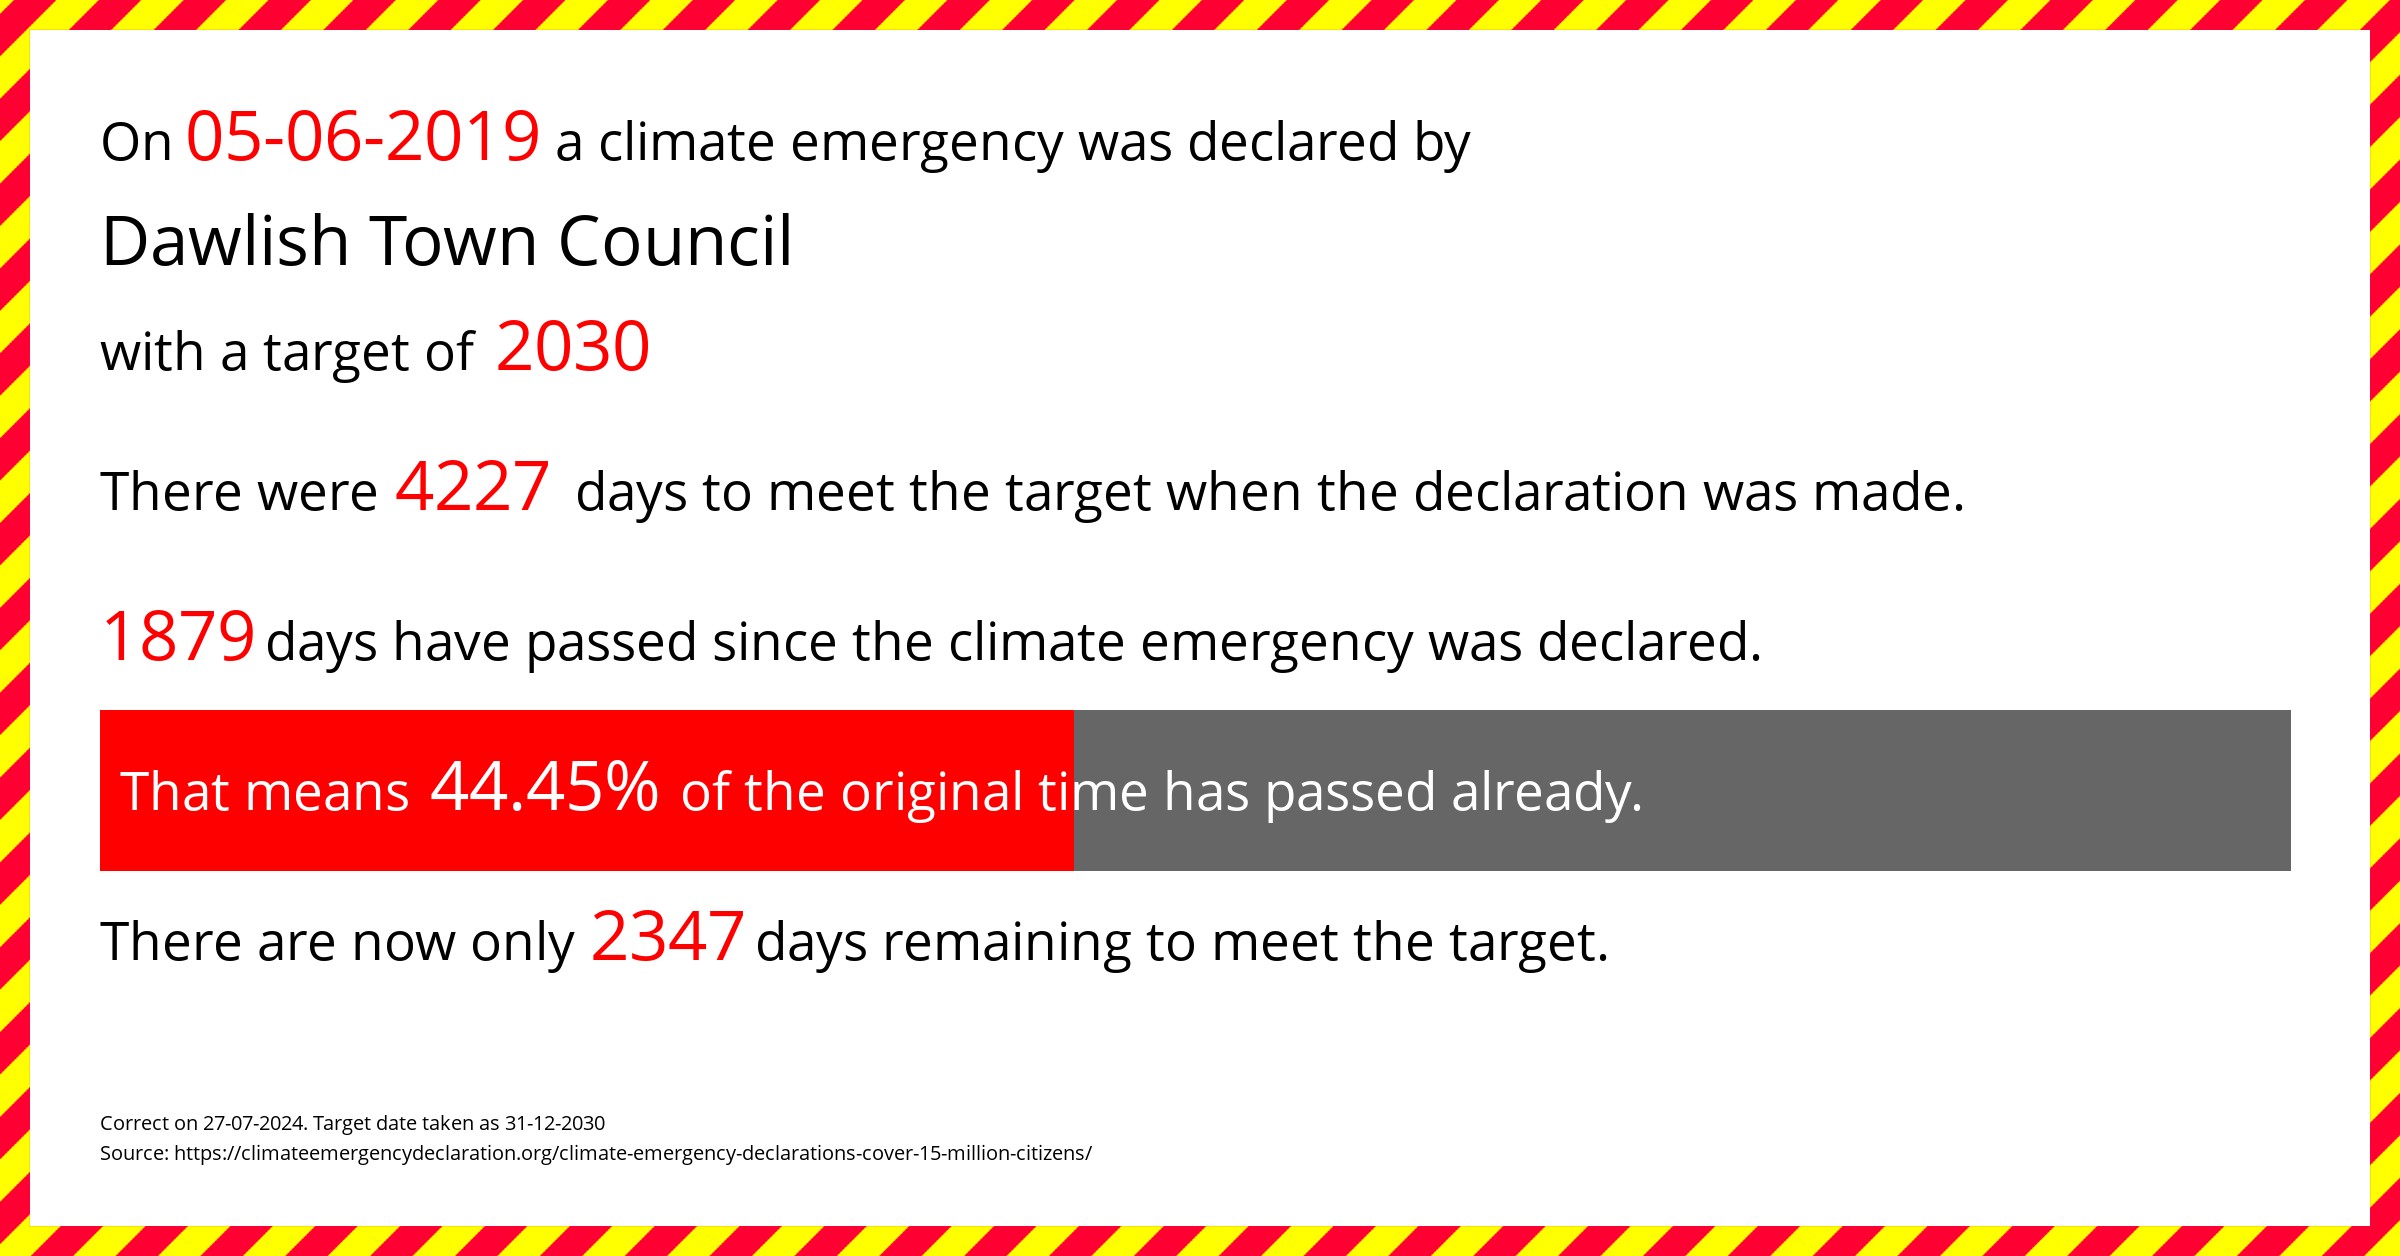 Dawlish Town Council declared a Climate emergency on Wednesday 5th June 2019, with a target of 2030.